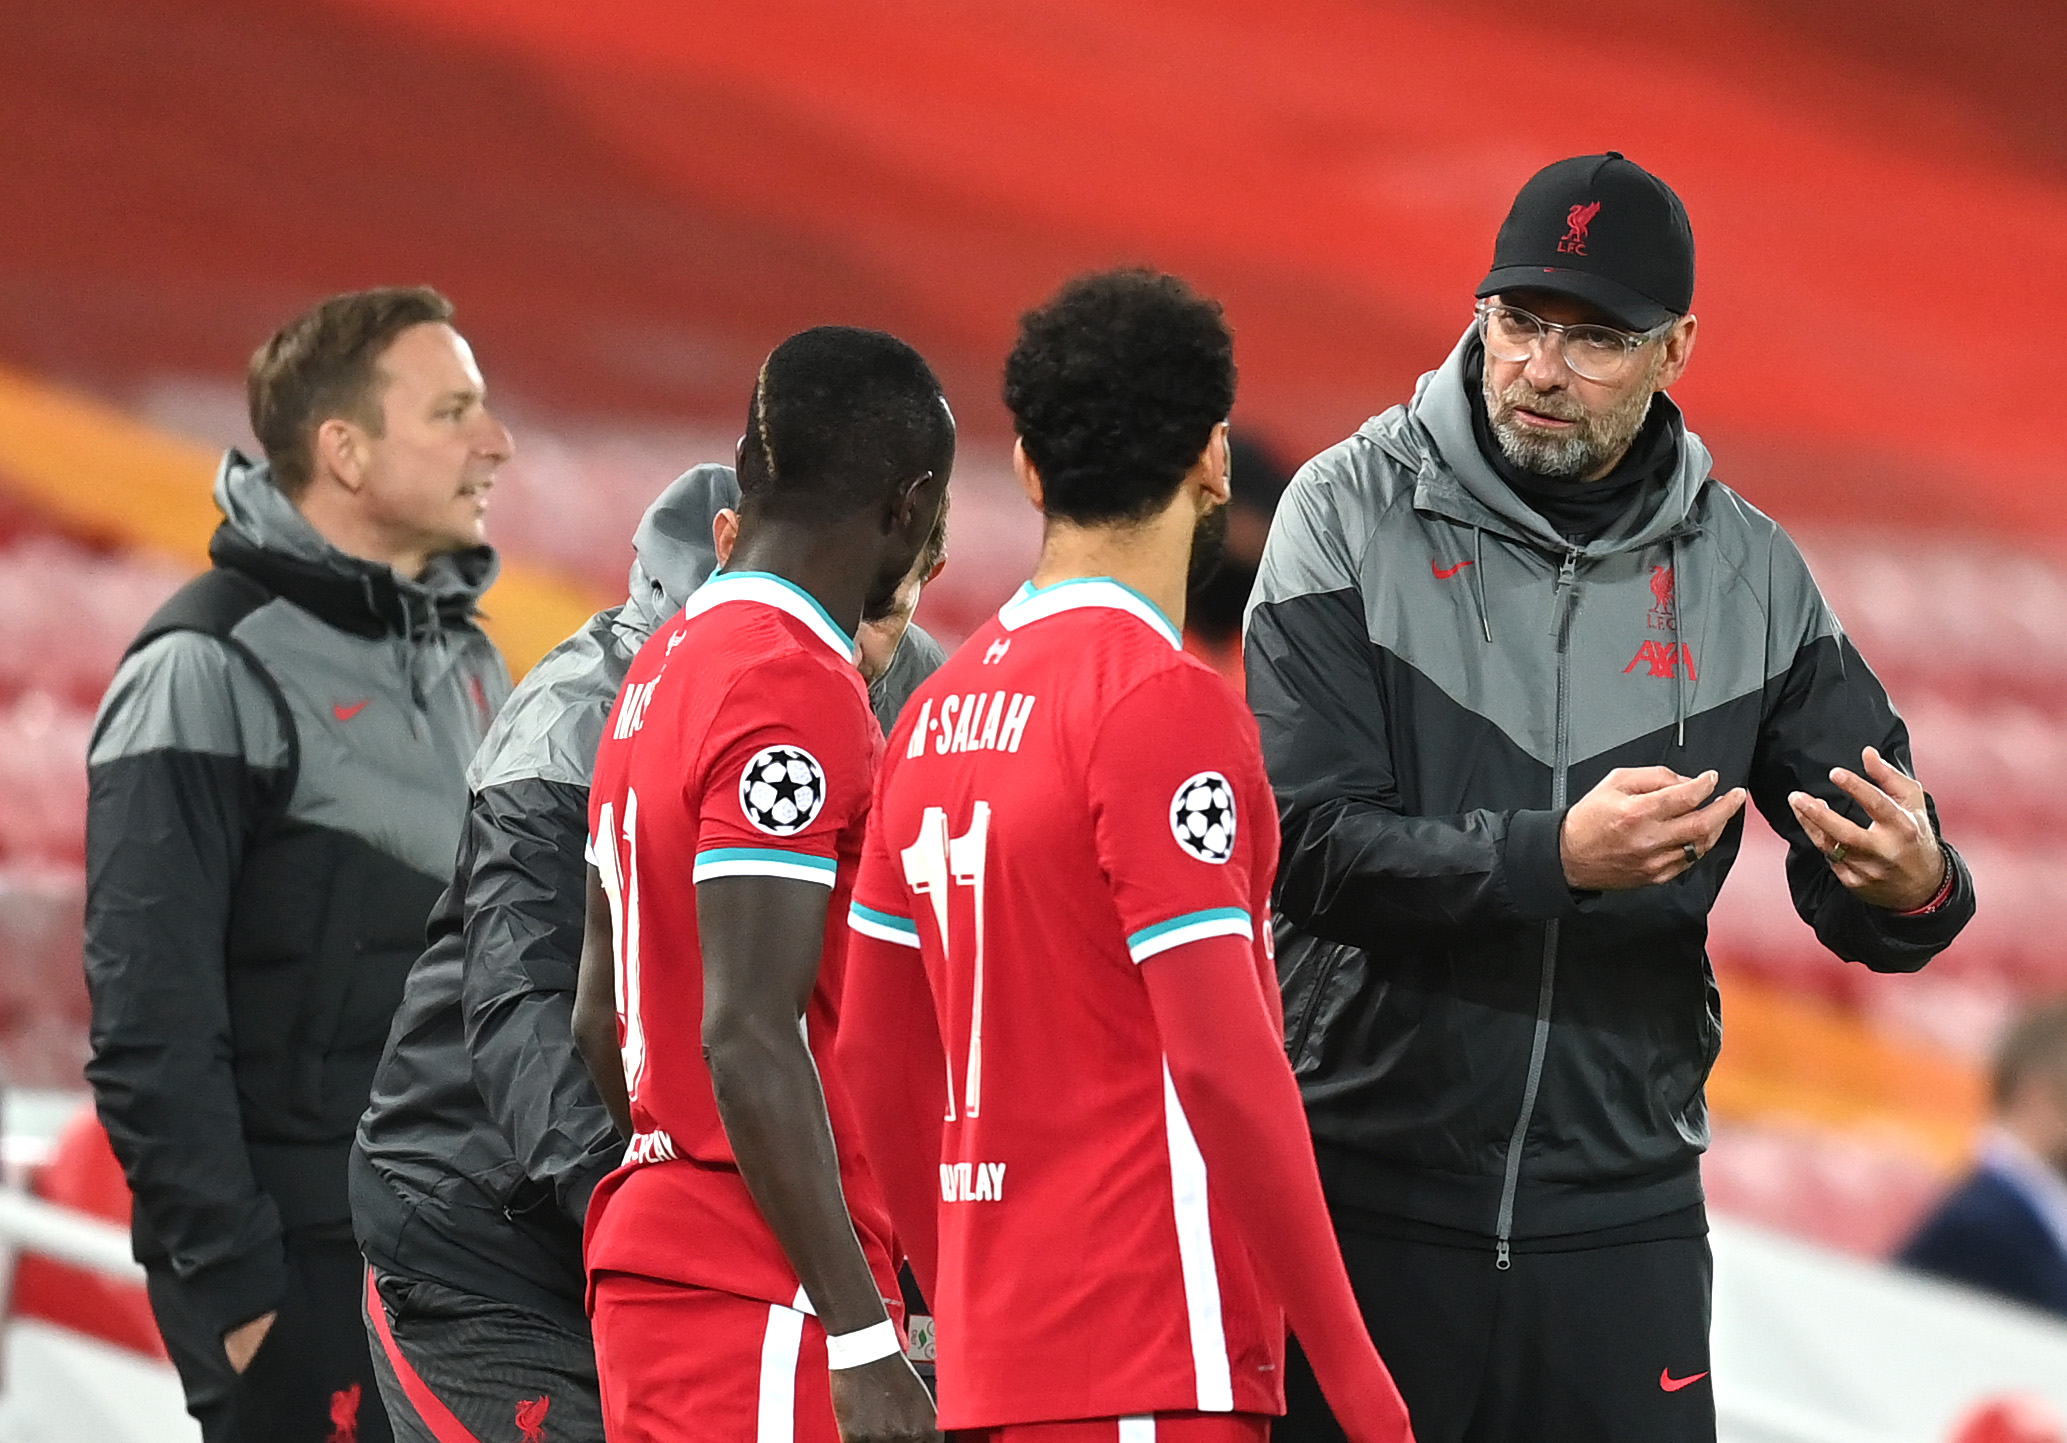 Jurgen Klopp will relish finding solutions to Liverpool’s problems